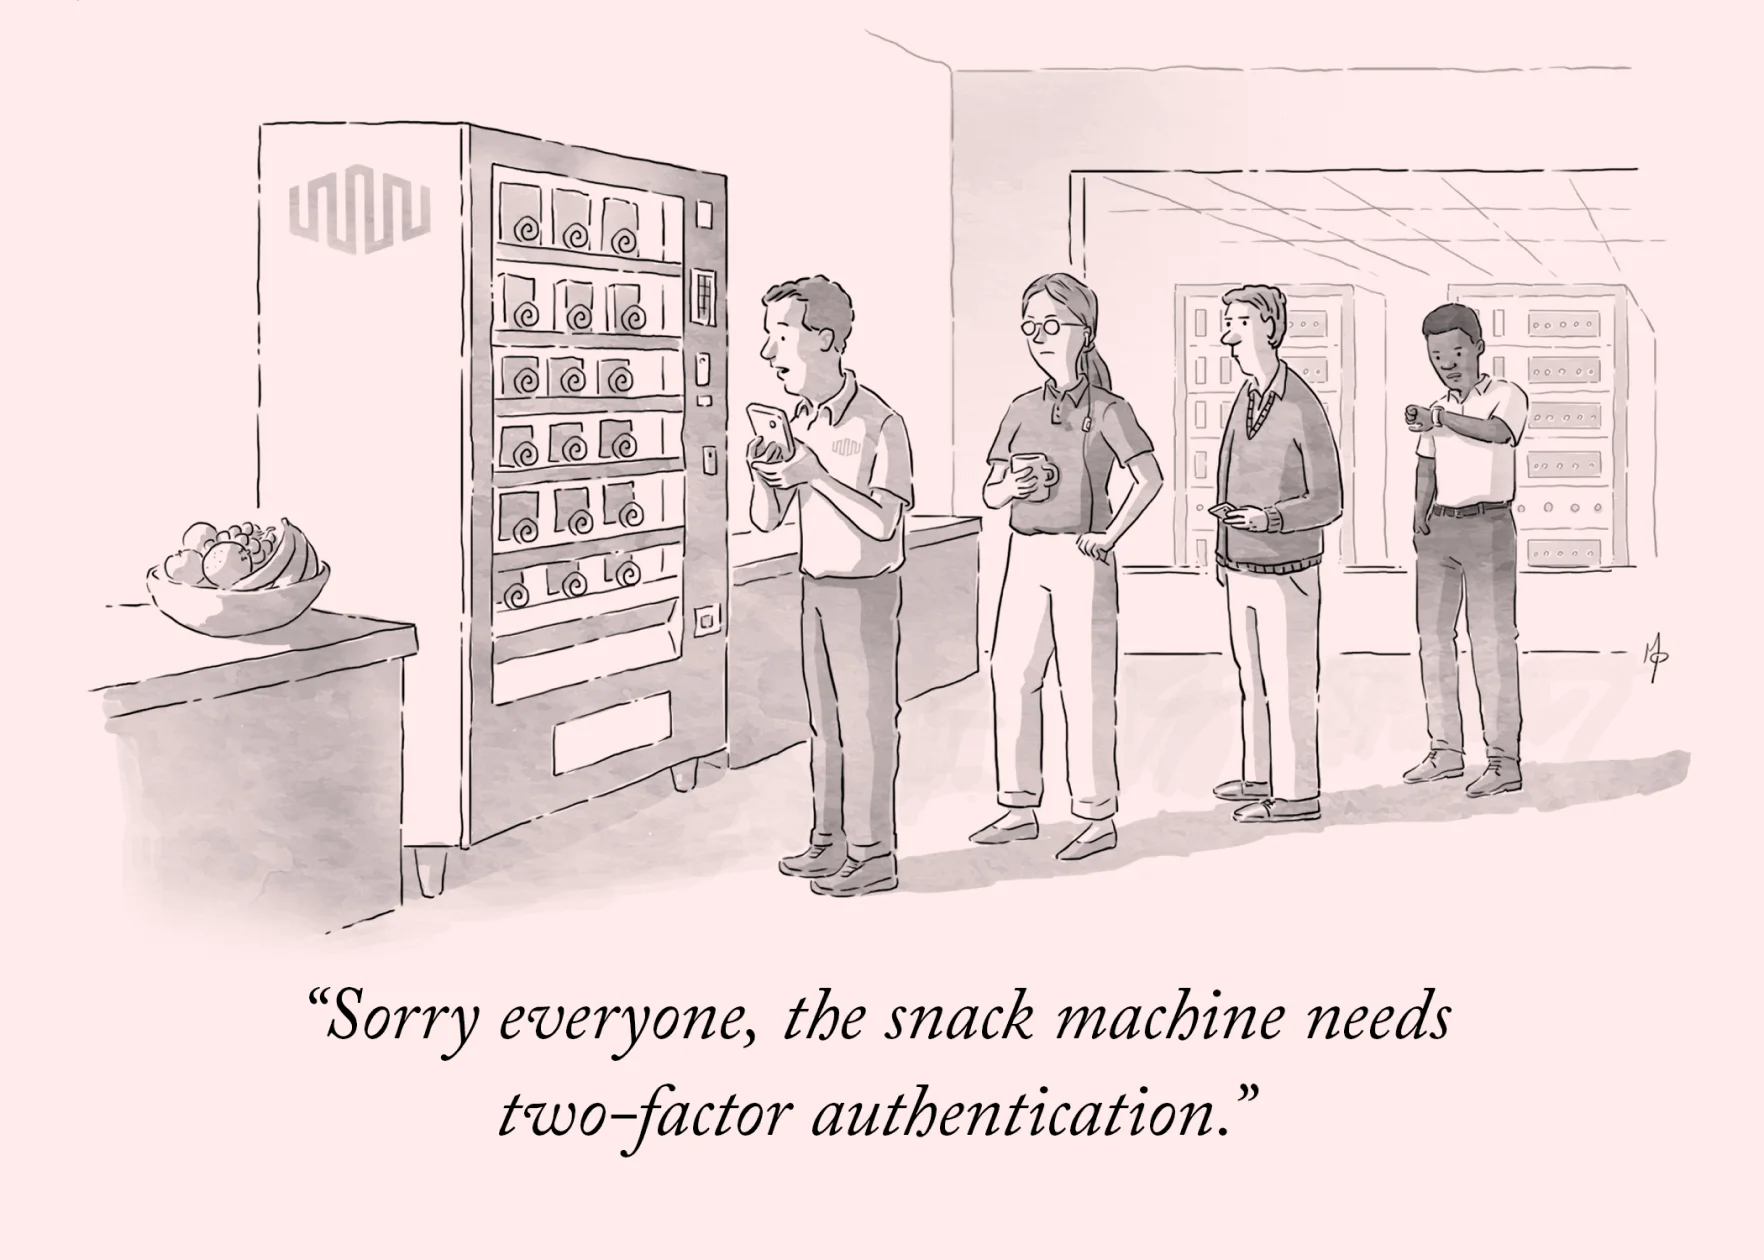 A cartoon-style illustration. A line of people are waiting to use an office vending machine. The caption reads: Sorry everyone, the snack machine needs two-factor authentication.